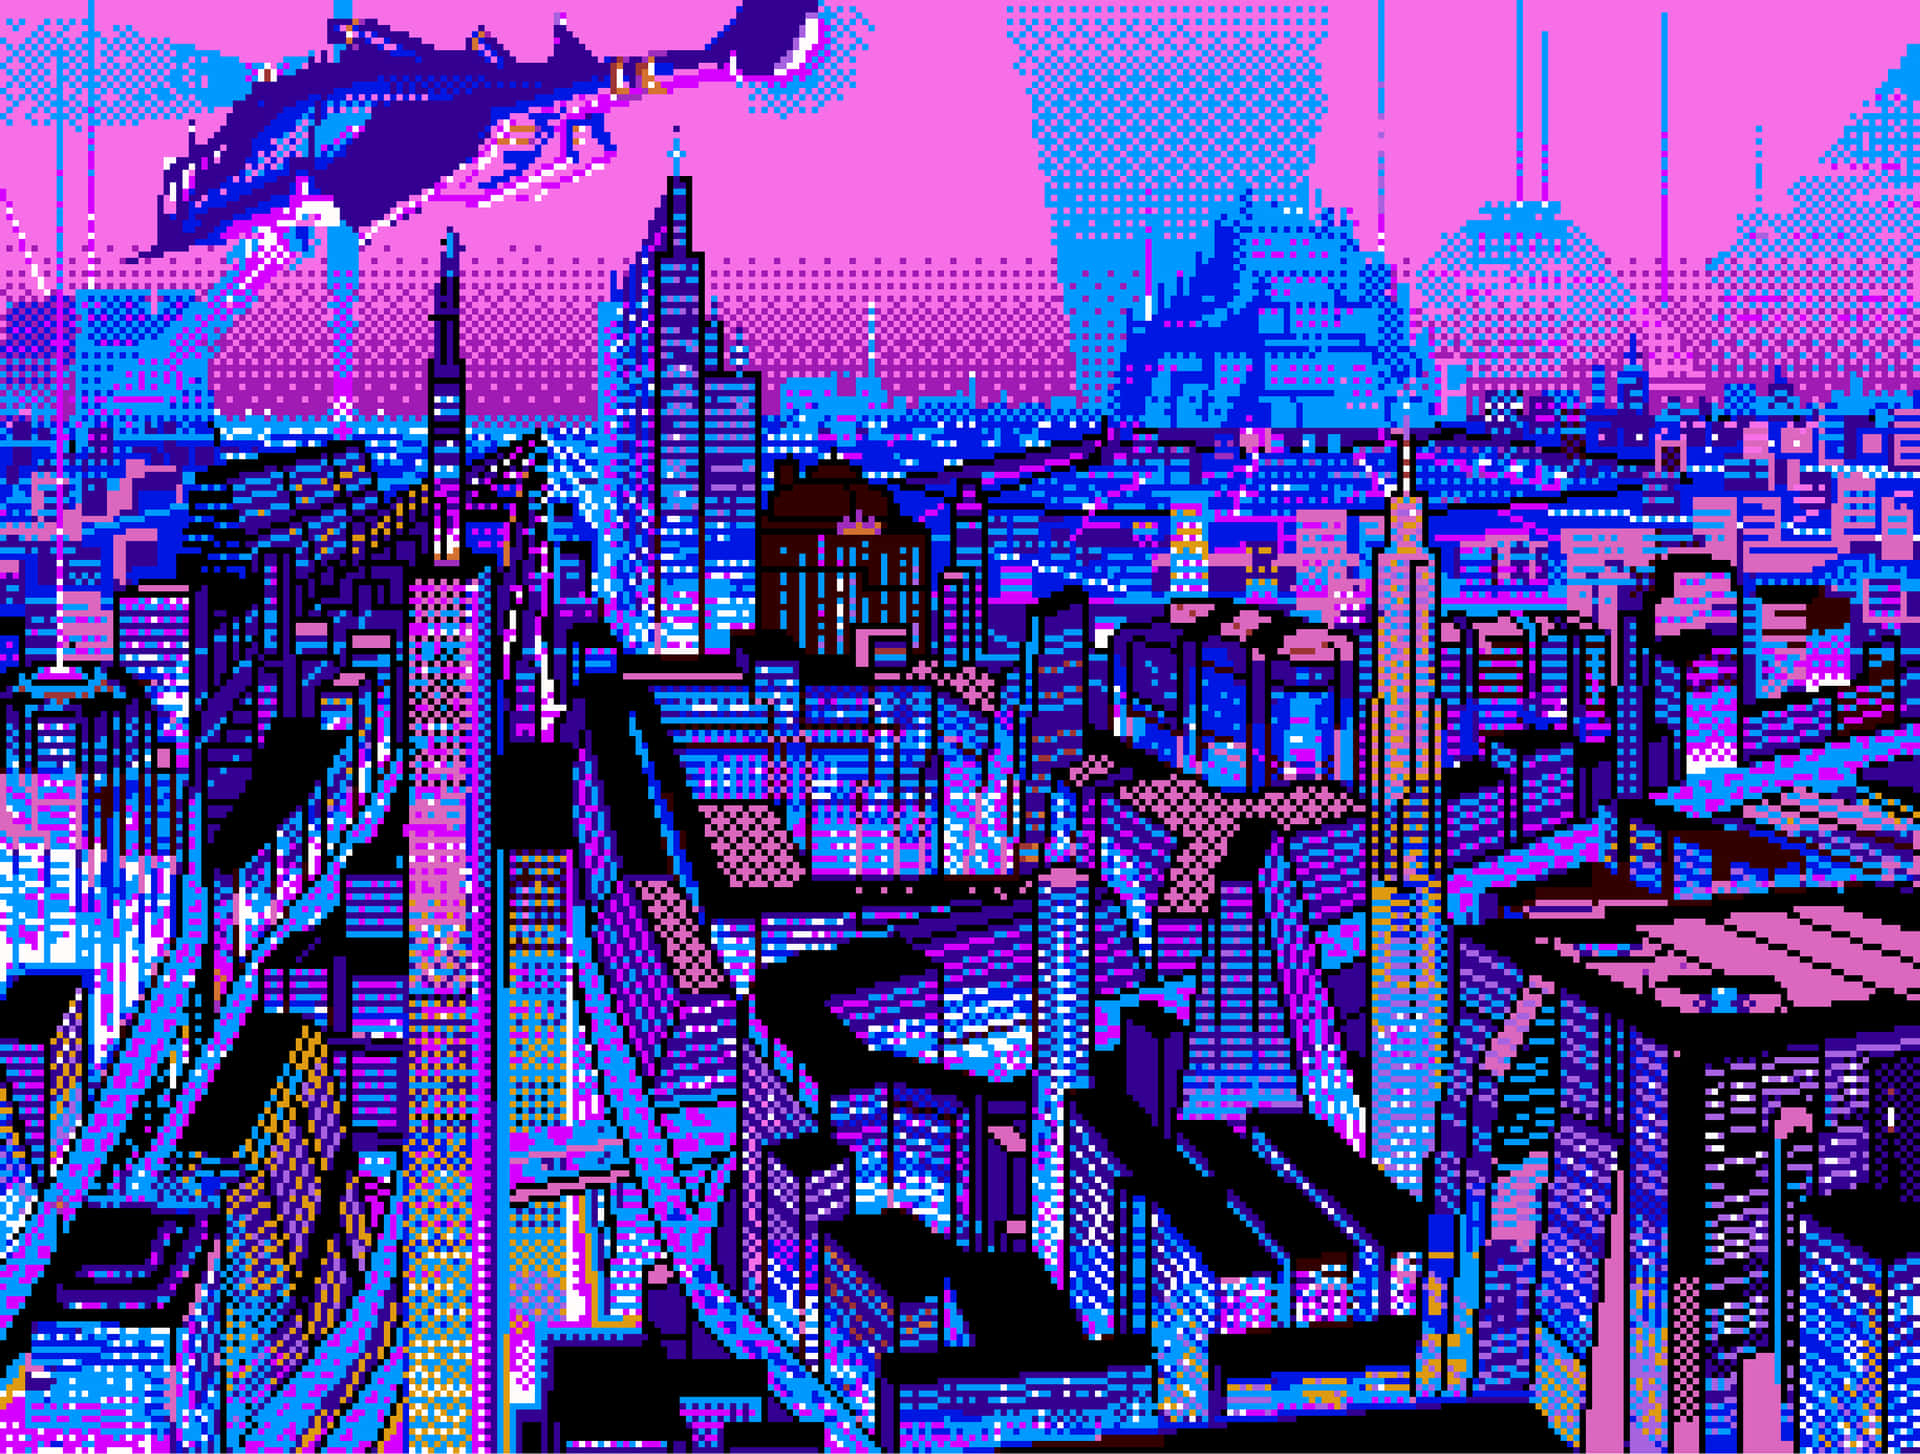 Get ready to be immersed into the cyberpunk pixel art! Wallpaper